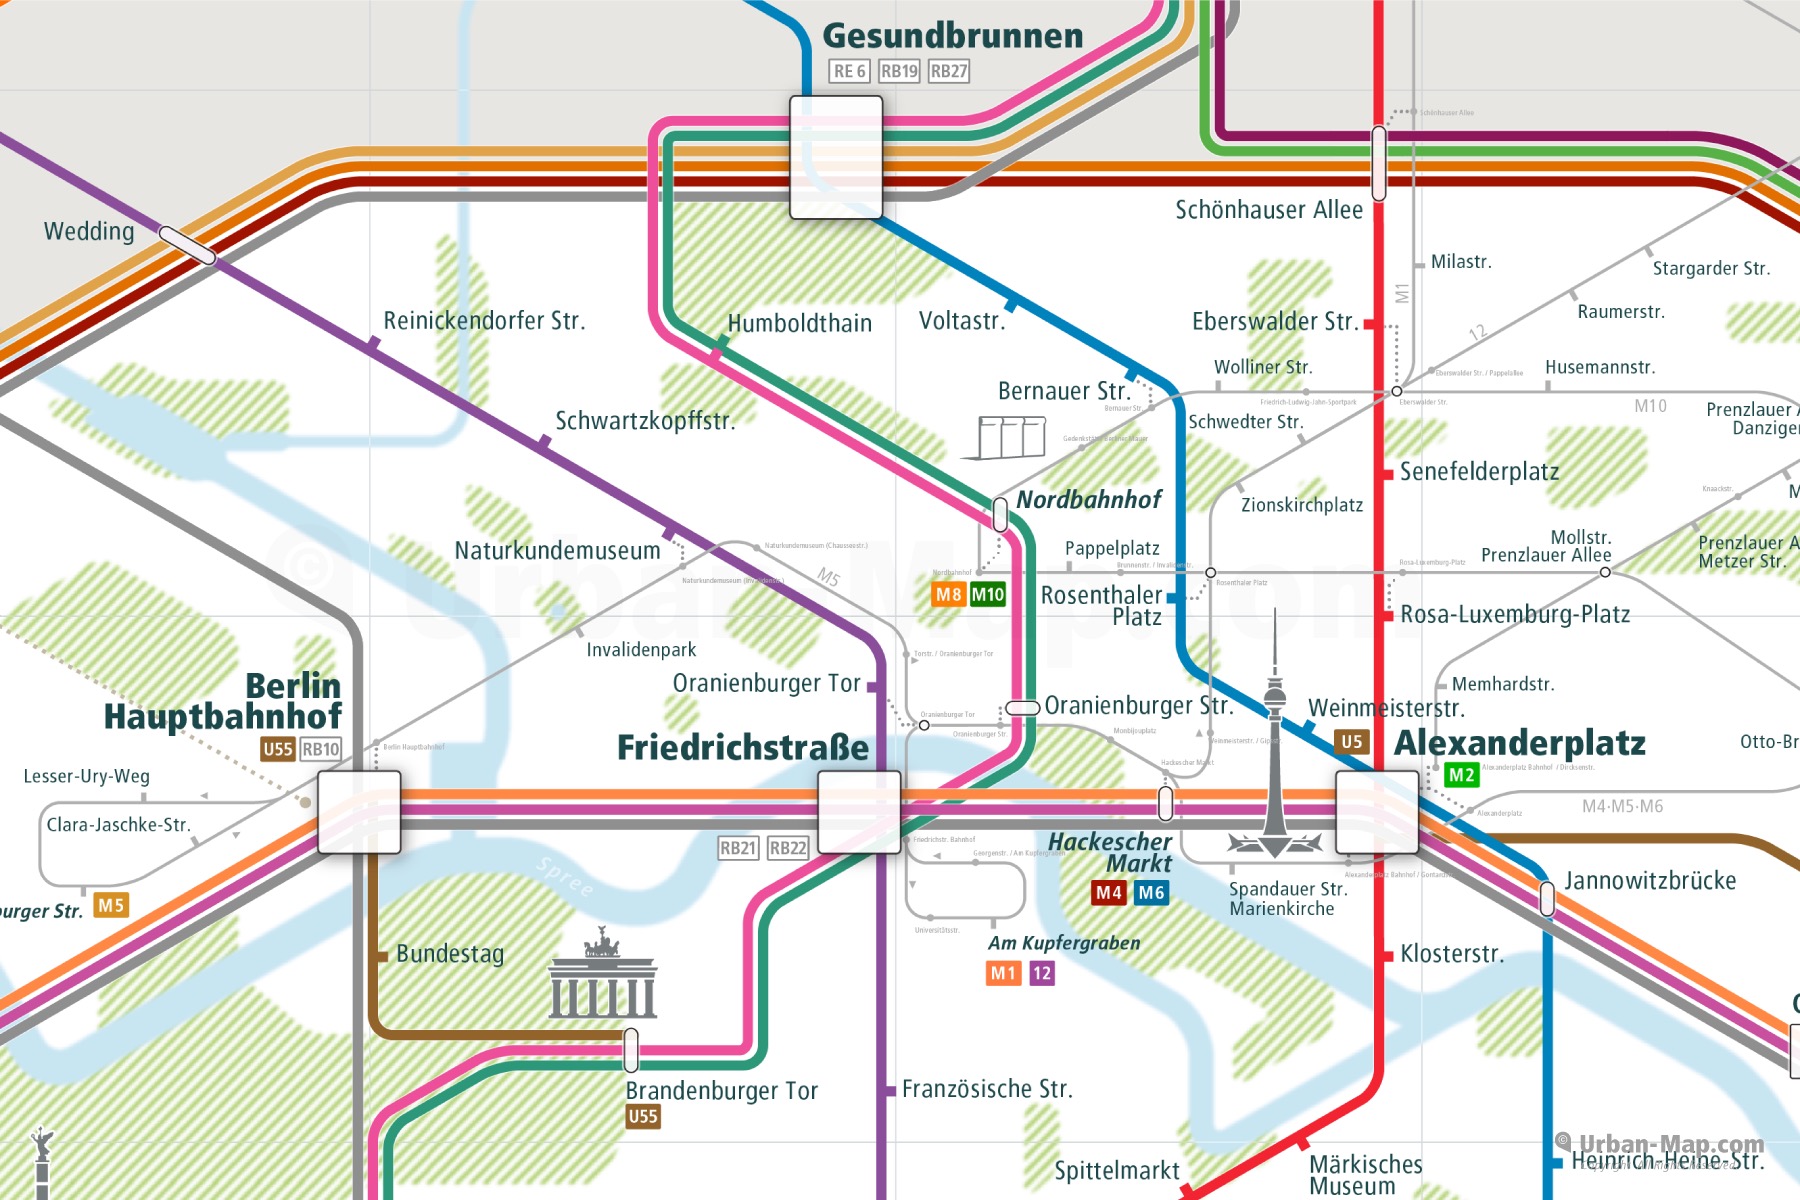 Berlin City Rail Map shows the train and public transportation routes of Metro, U-Bahn, S-Bahn, Tram, RE Deutsche Bahn and Airport Link - Close-Up